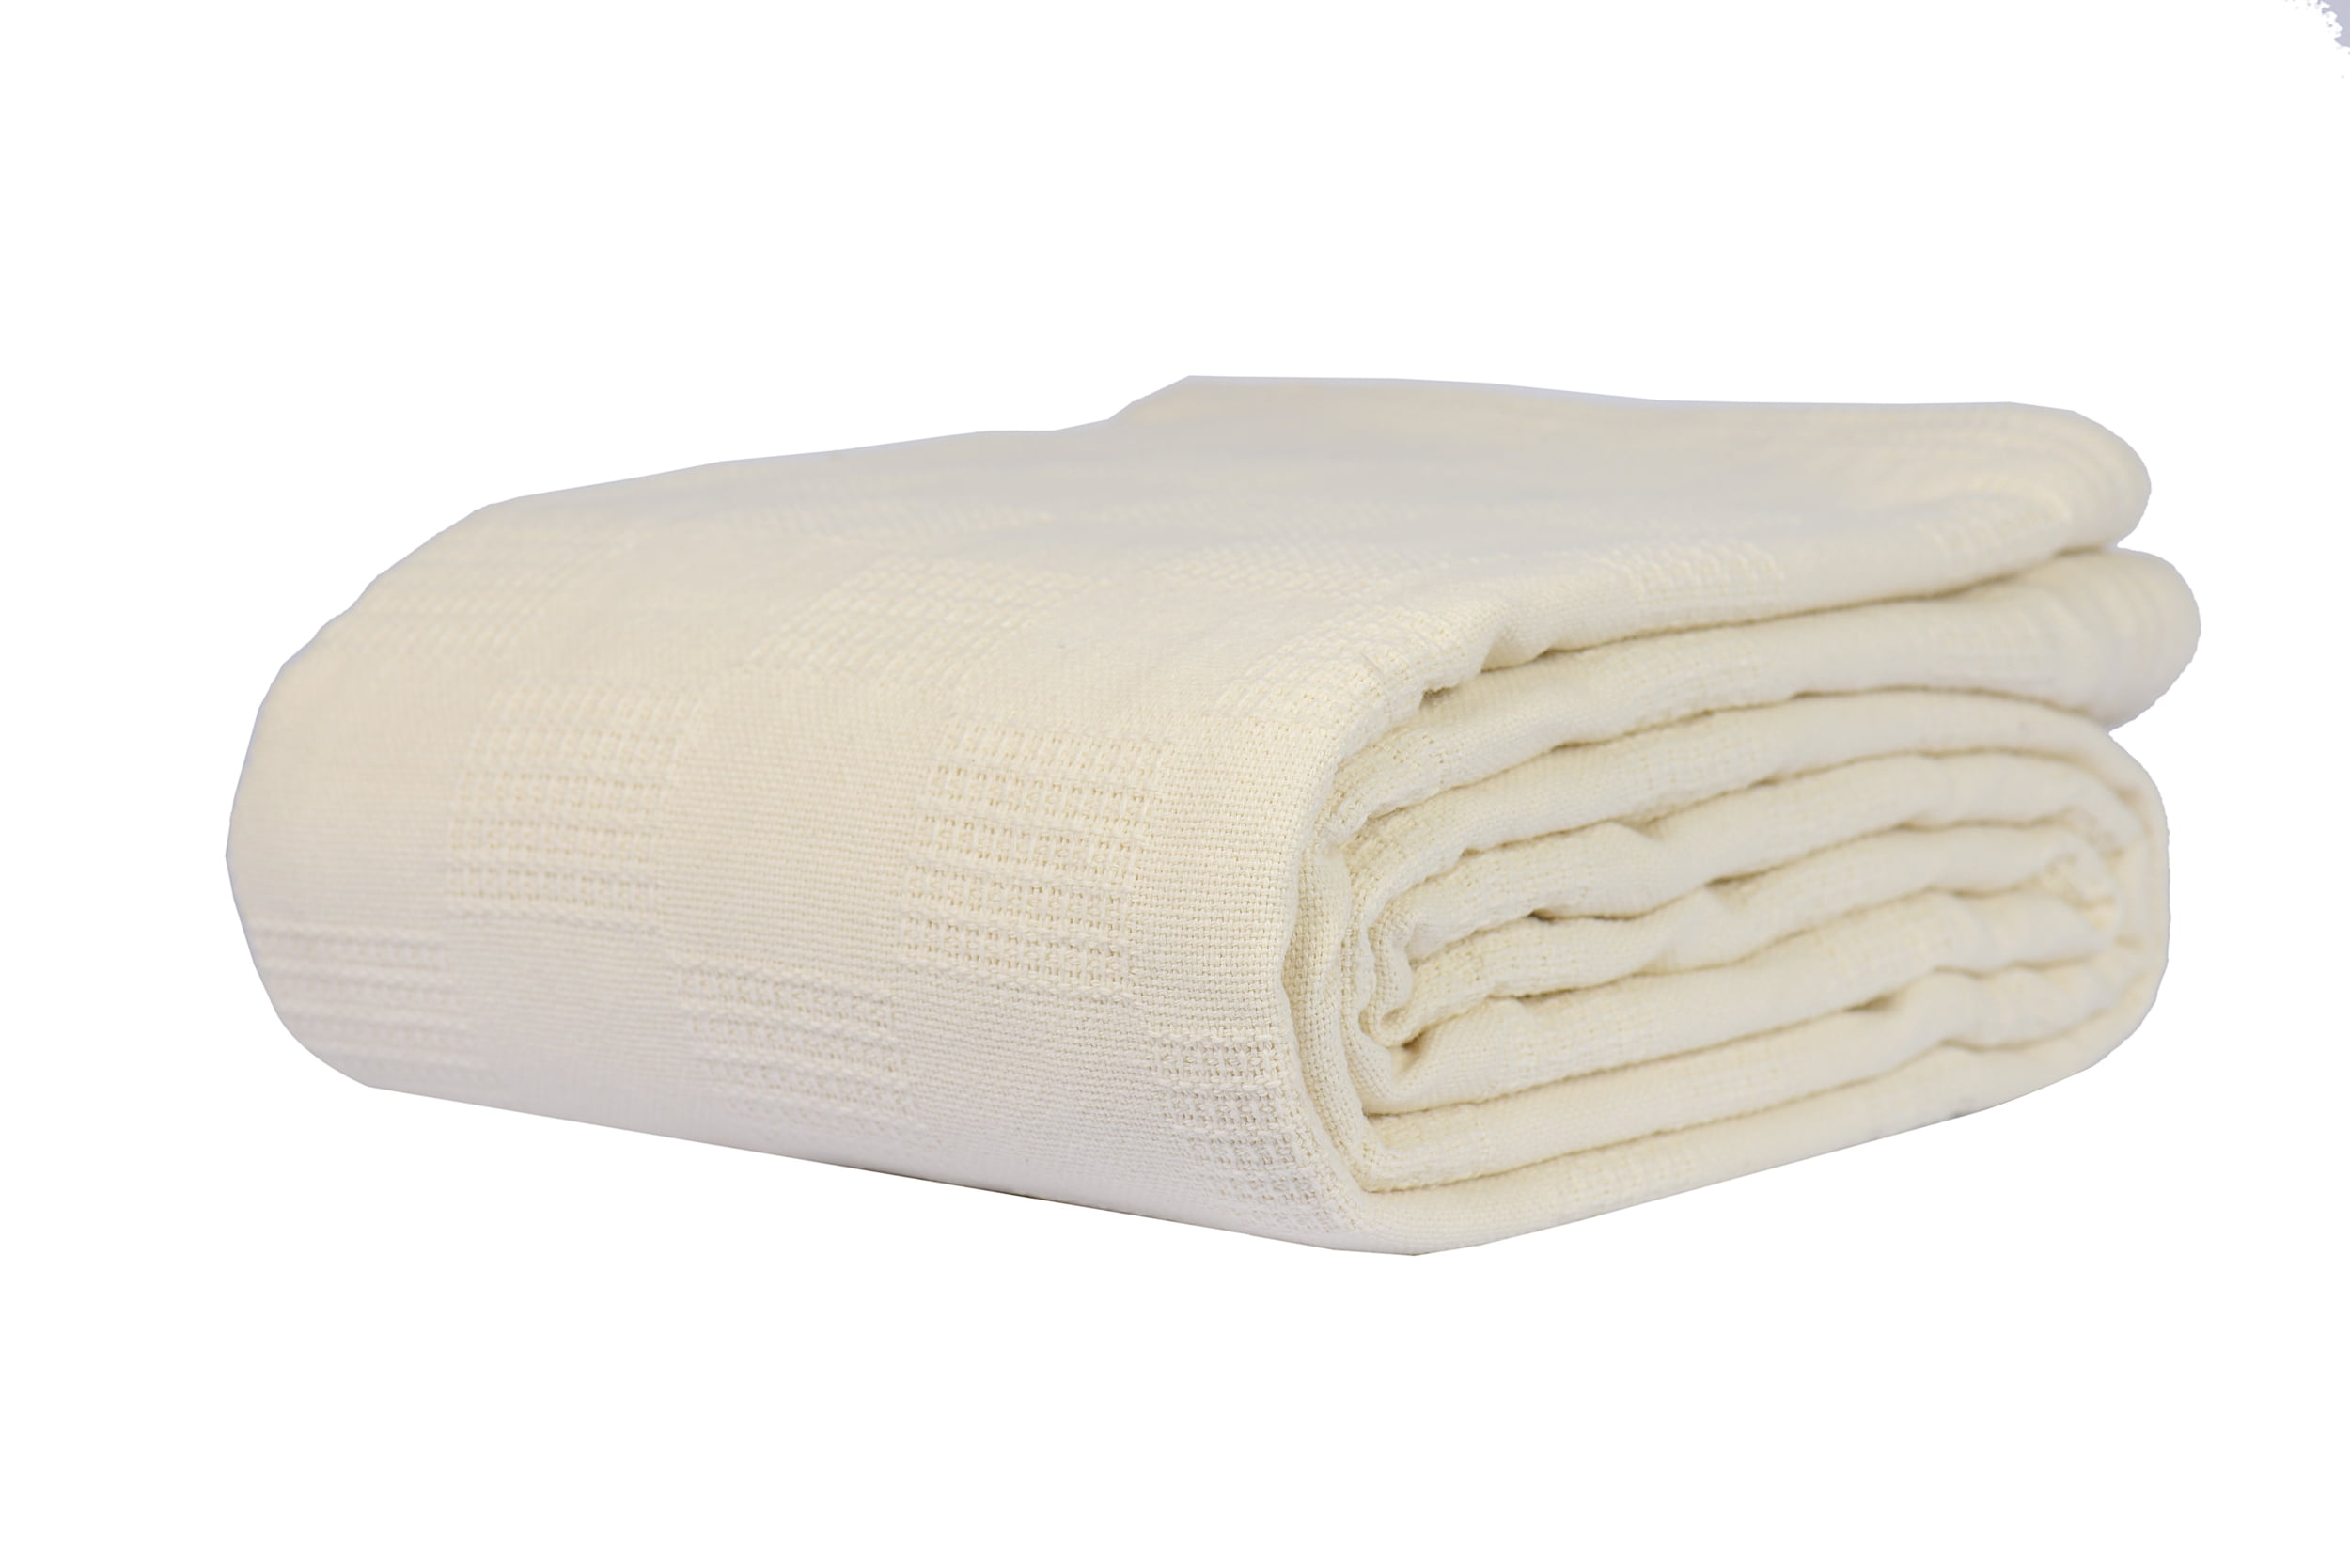 White) Linteum Spread Blanket, Hospital Textile Thermal SNAGLESS (74x100 100% in, Cotton